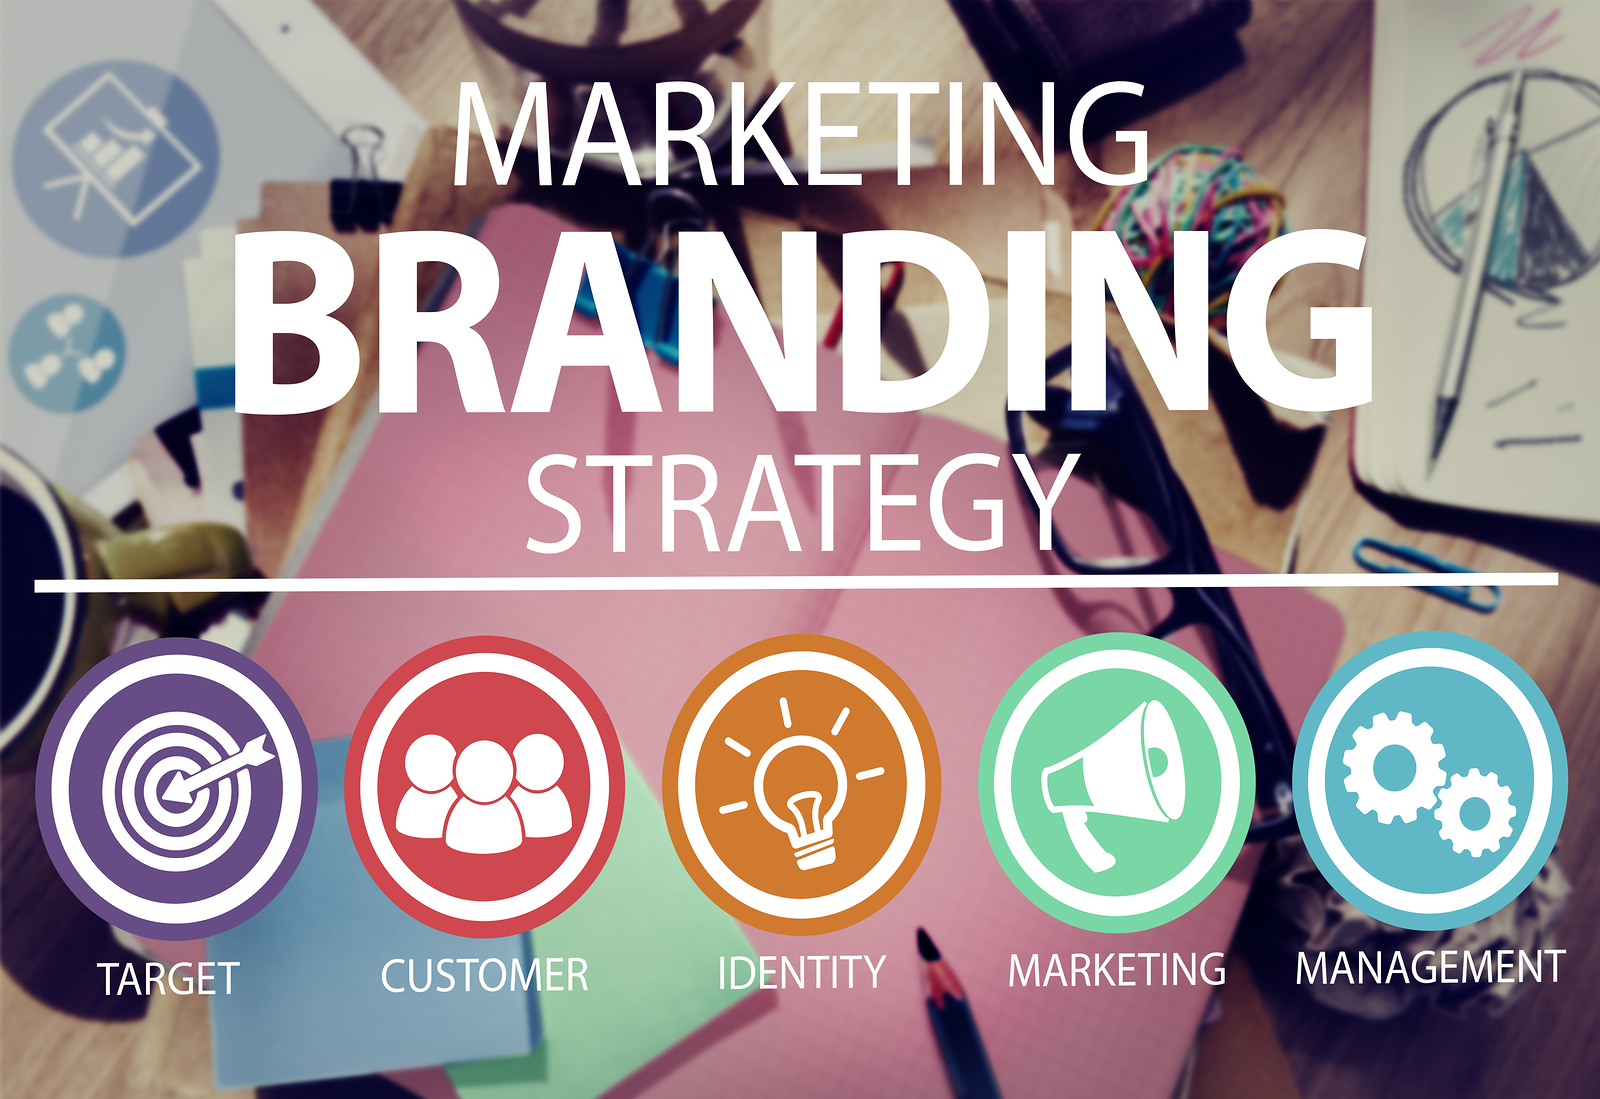 7 Creative Marketing Ideas that can Work Wonders for your Business